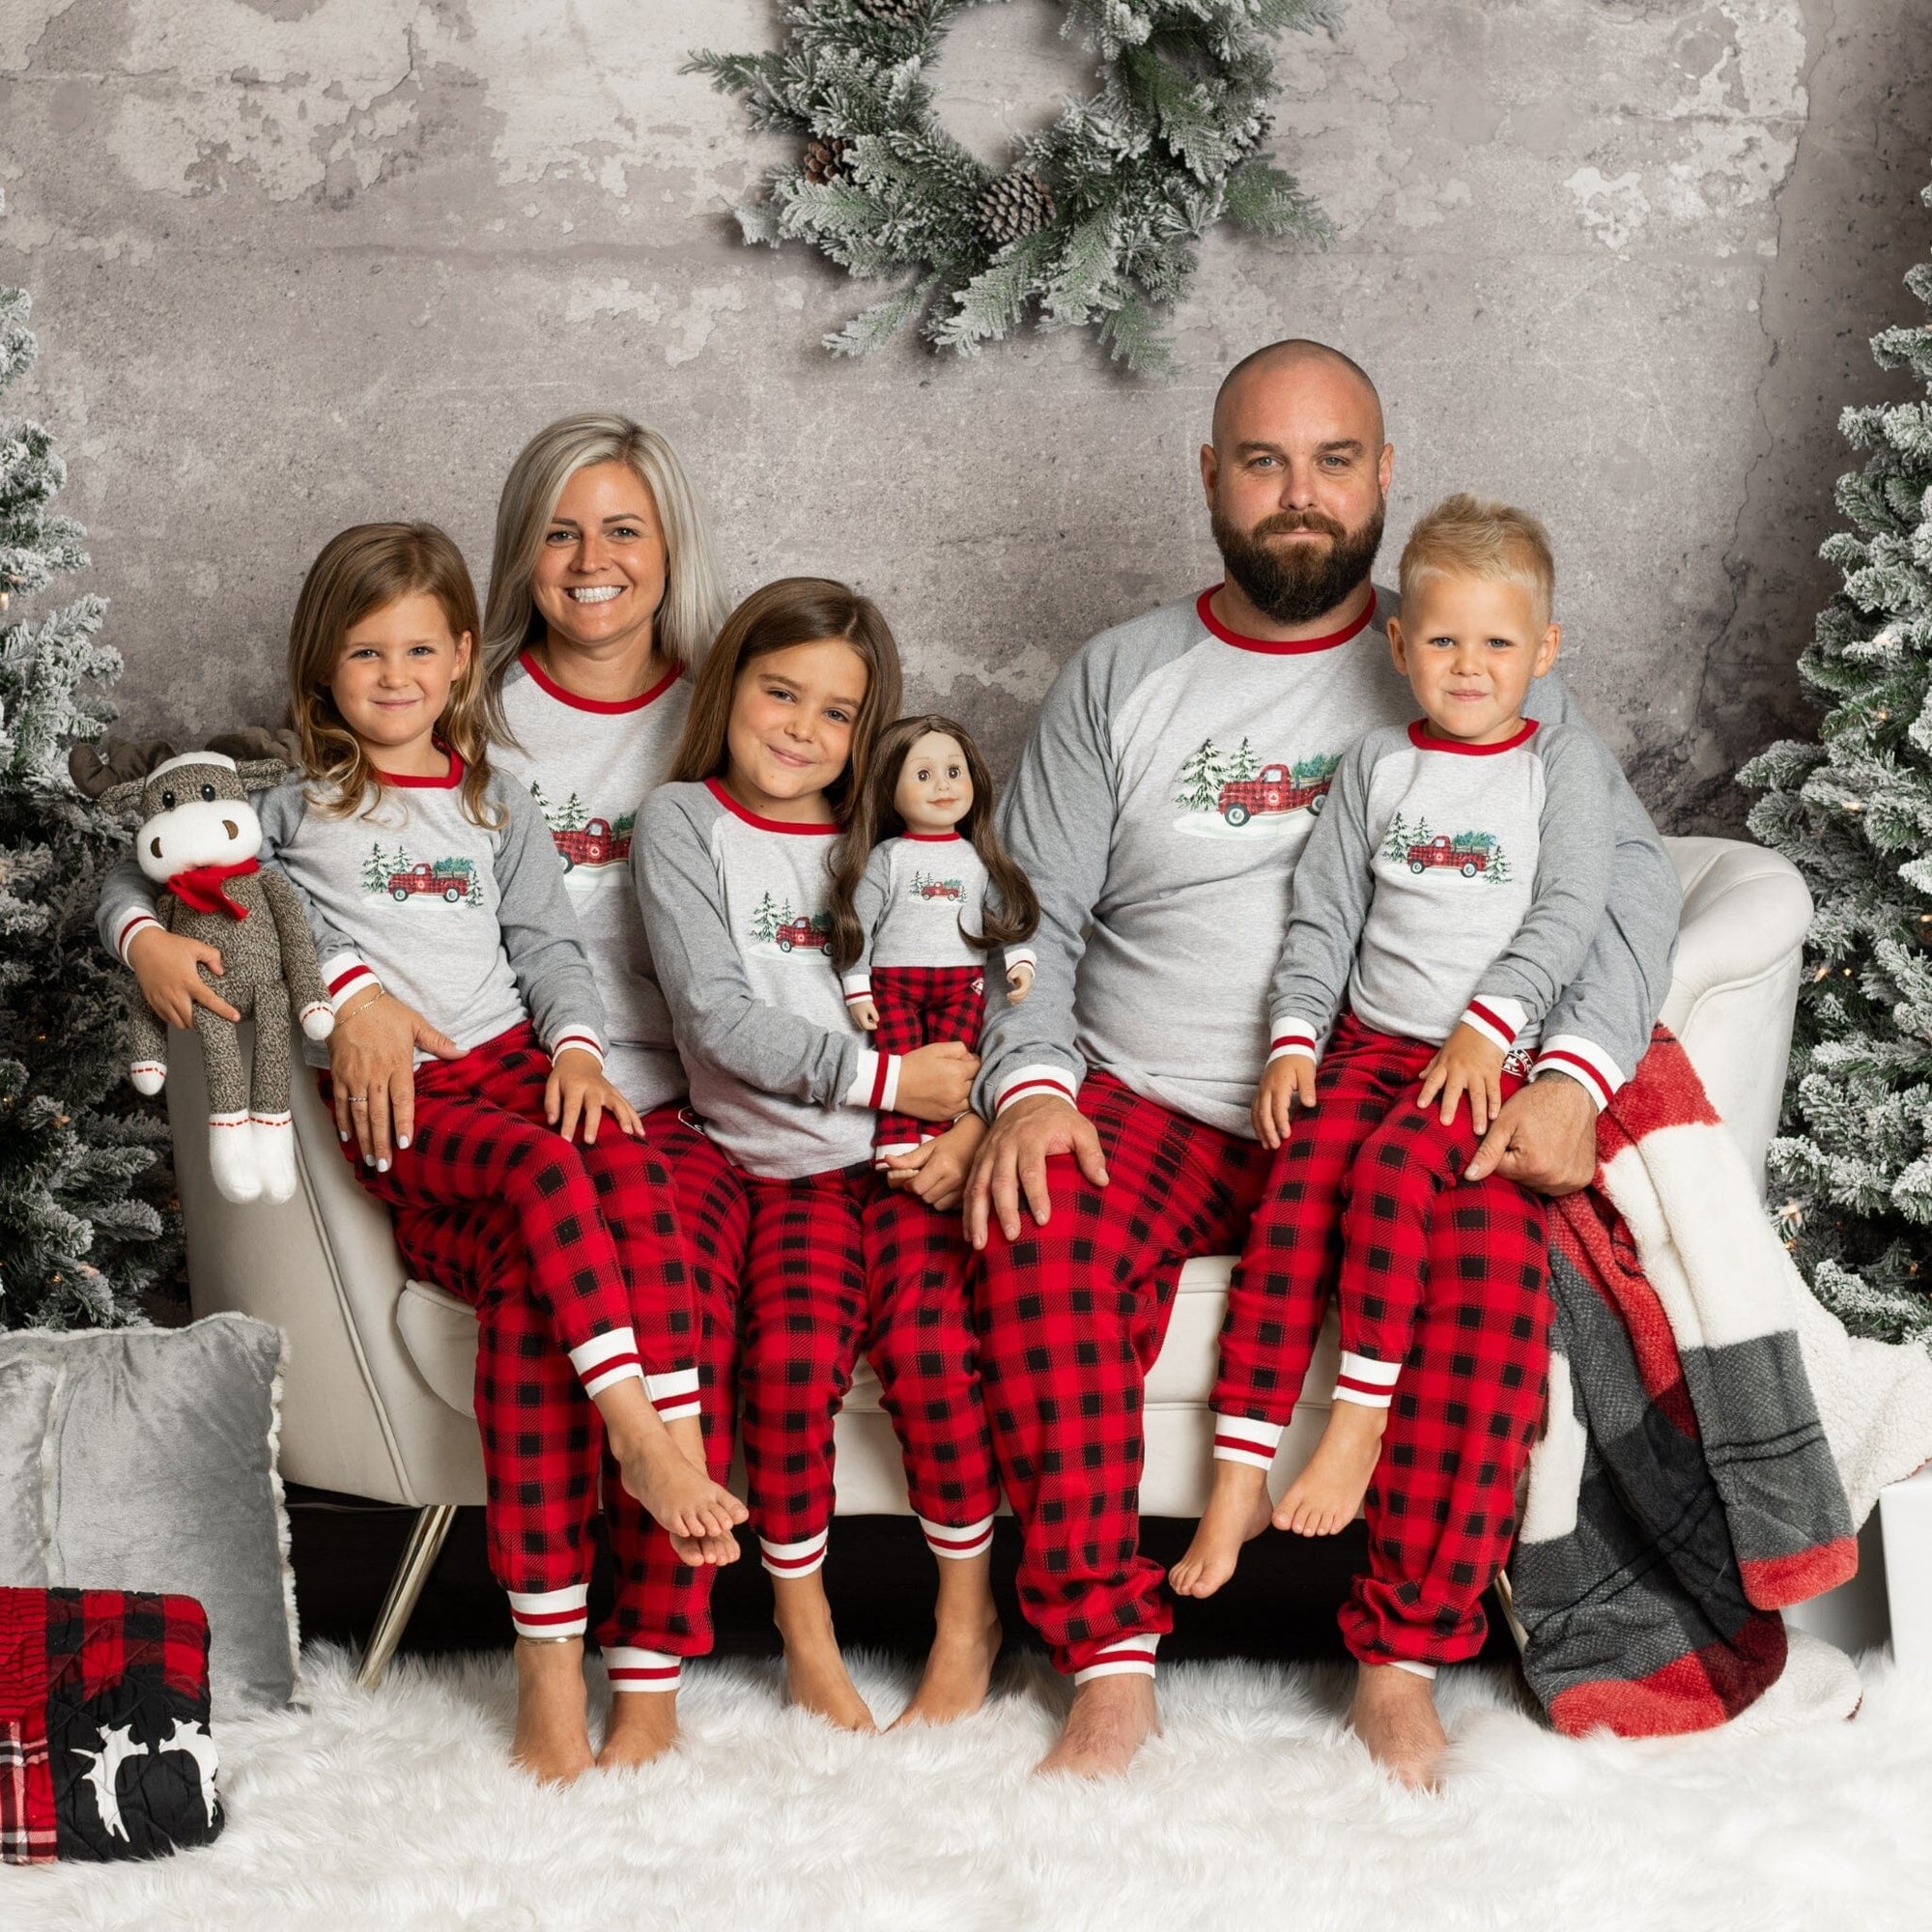 Matching pajamas for the whole family and doll, for Christmas or any holiday.